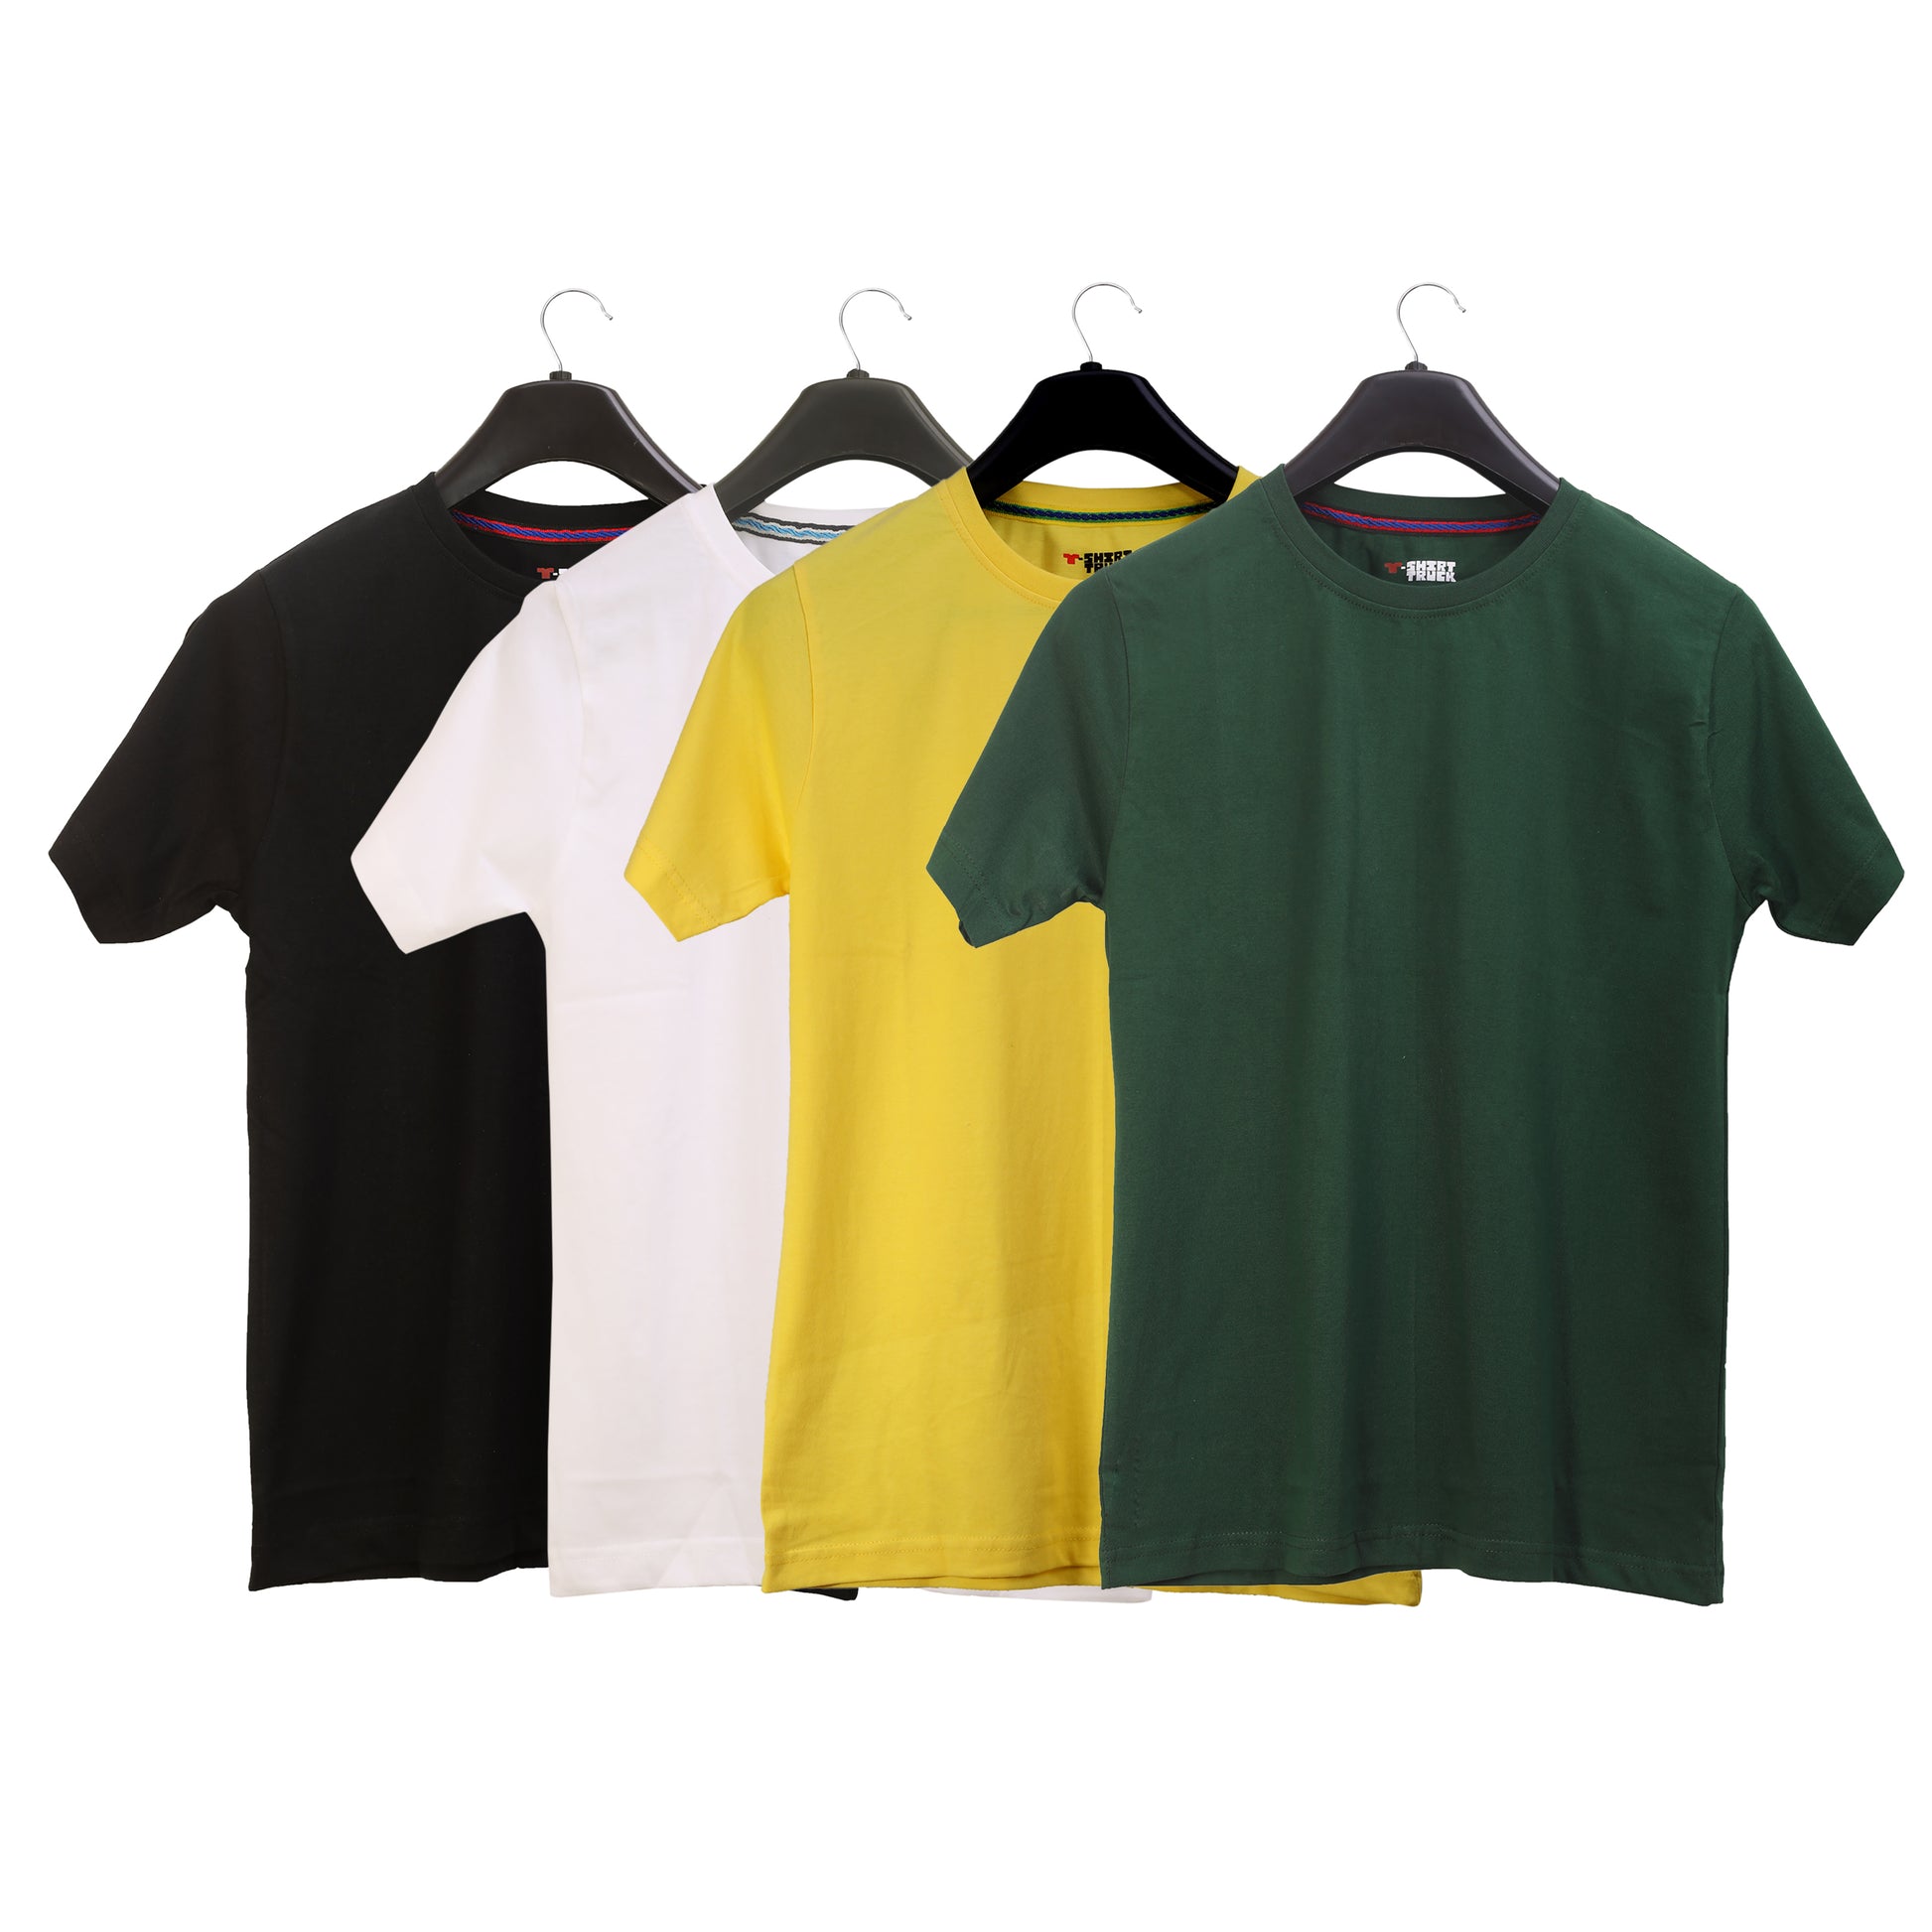 Unisex Round Neck Plain Solid Combo Pack of 4 T-shirts Black, Green, Yellow & White